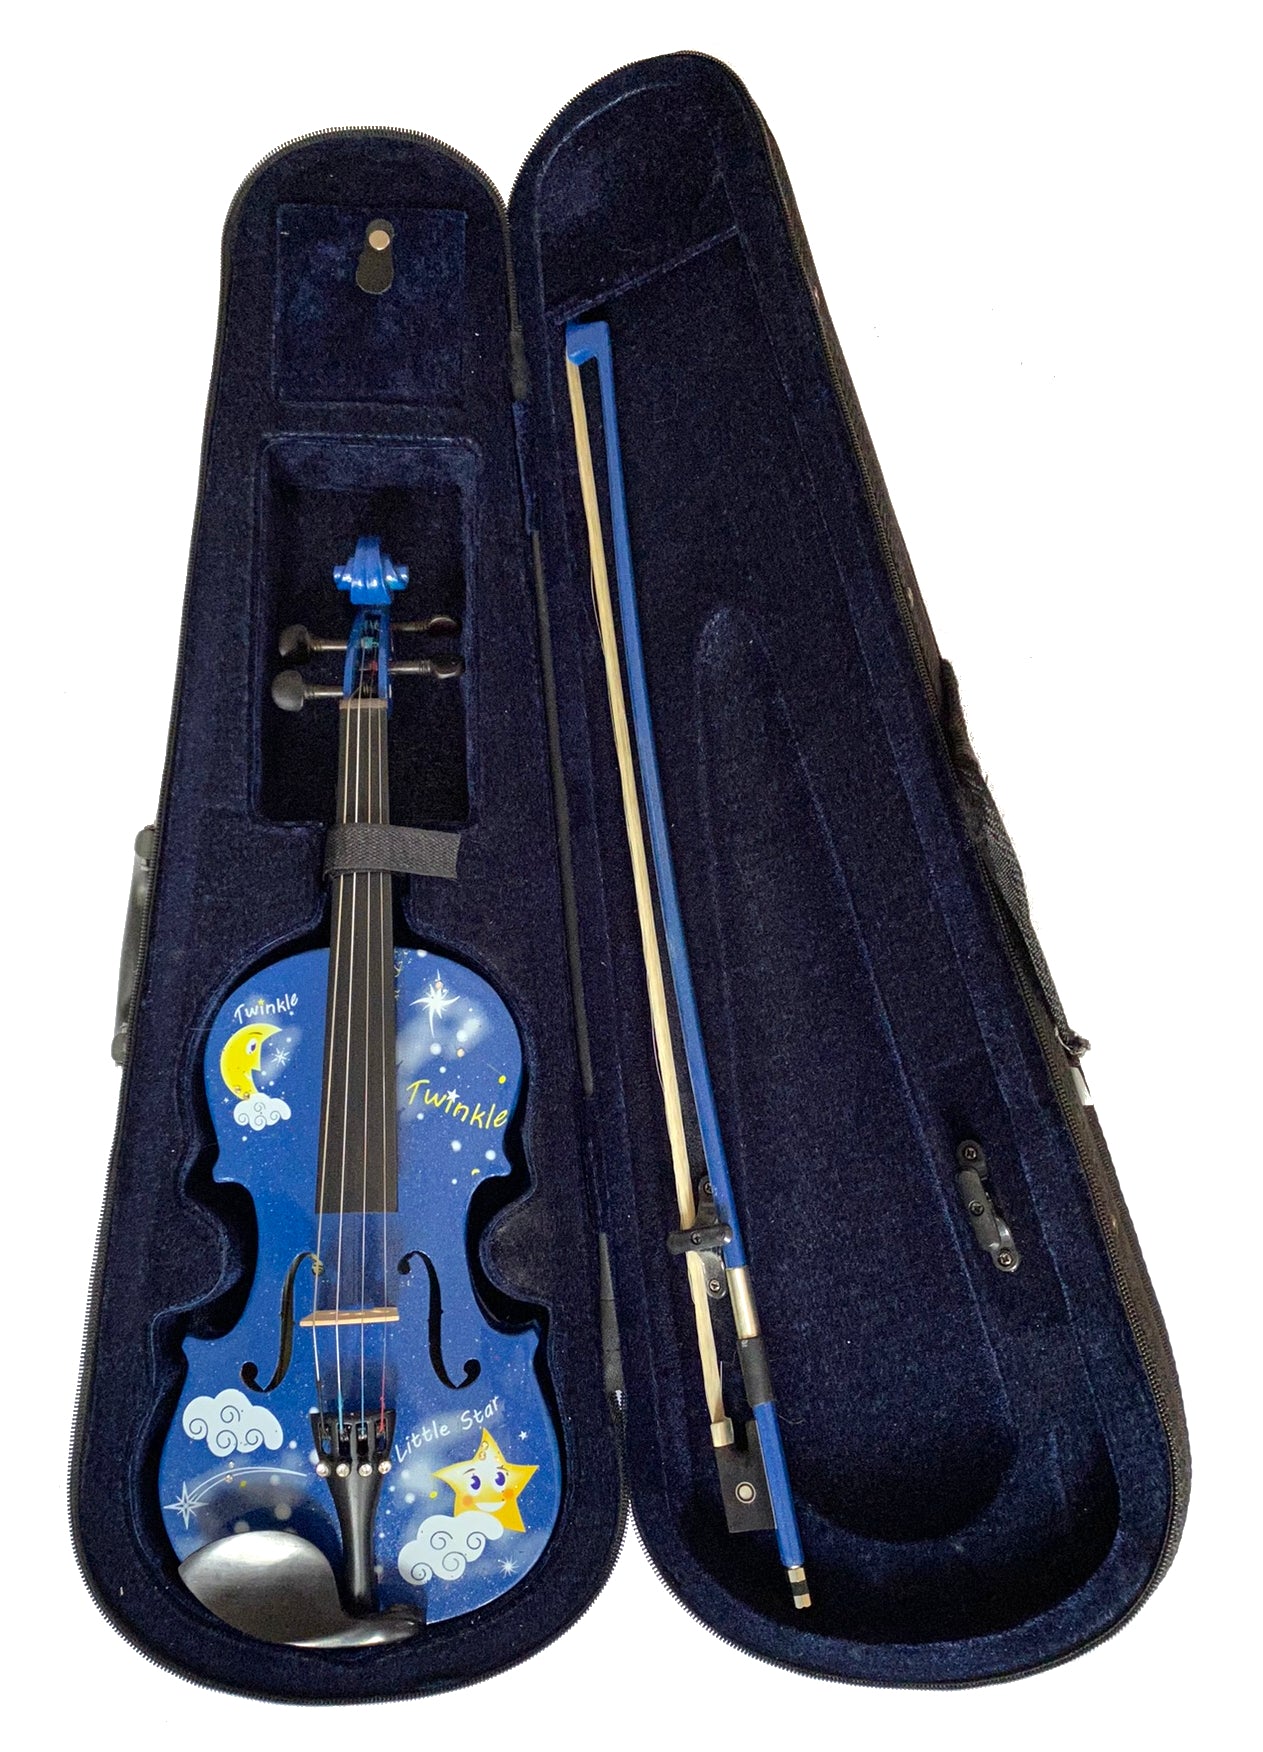 Blue Glitter Twinkle Star Violin Outfit - 1/4 Size - Rozanna's Violins